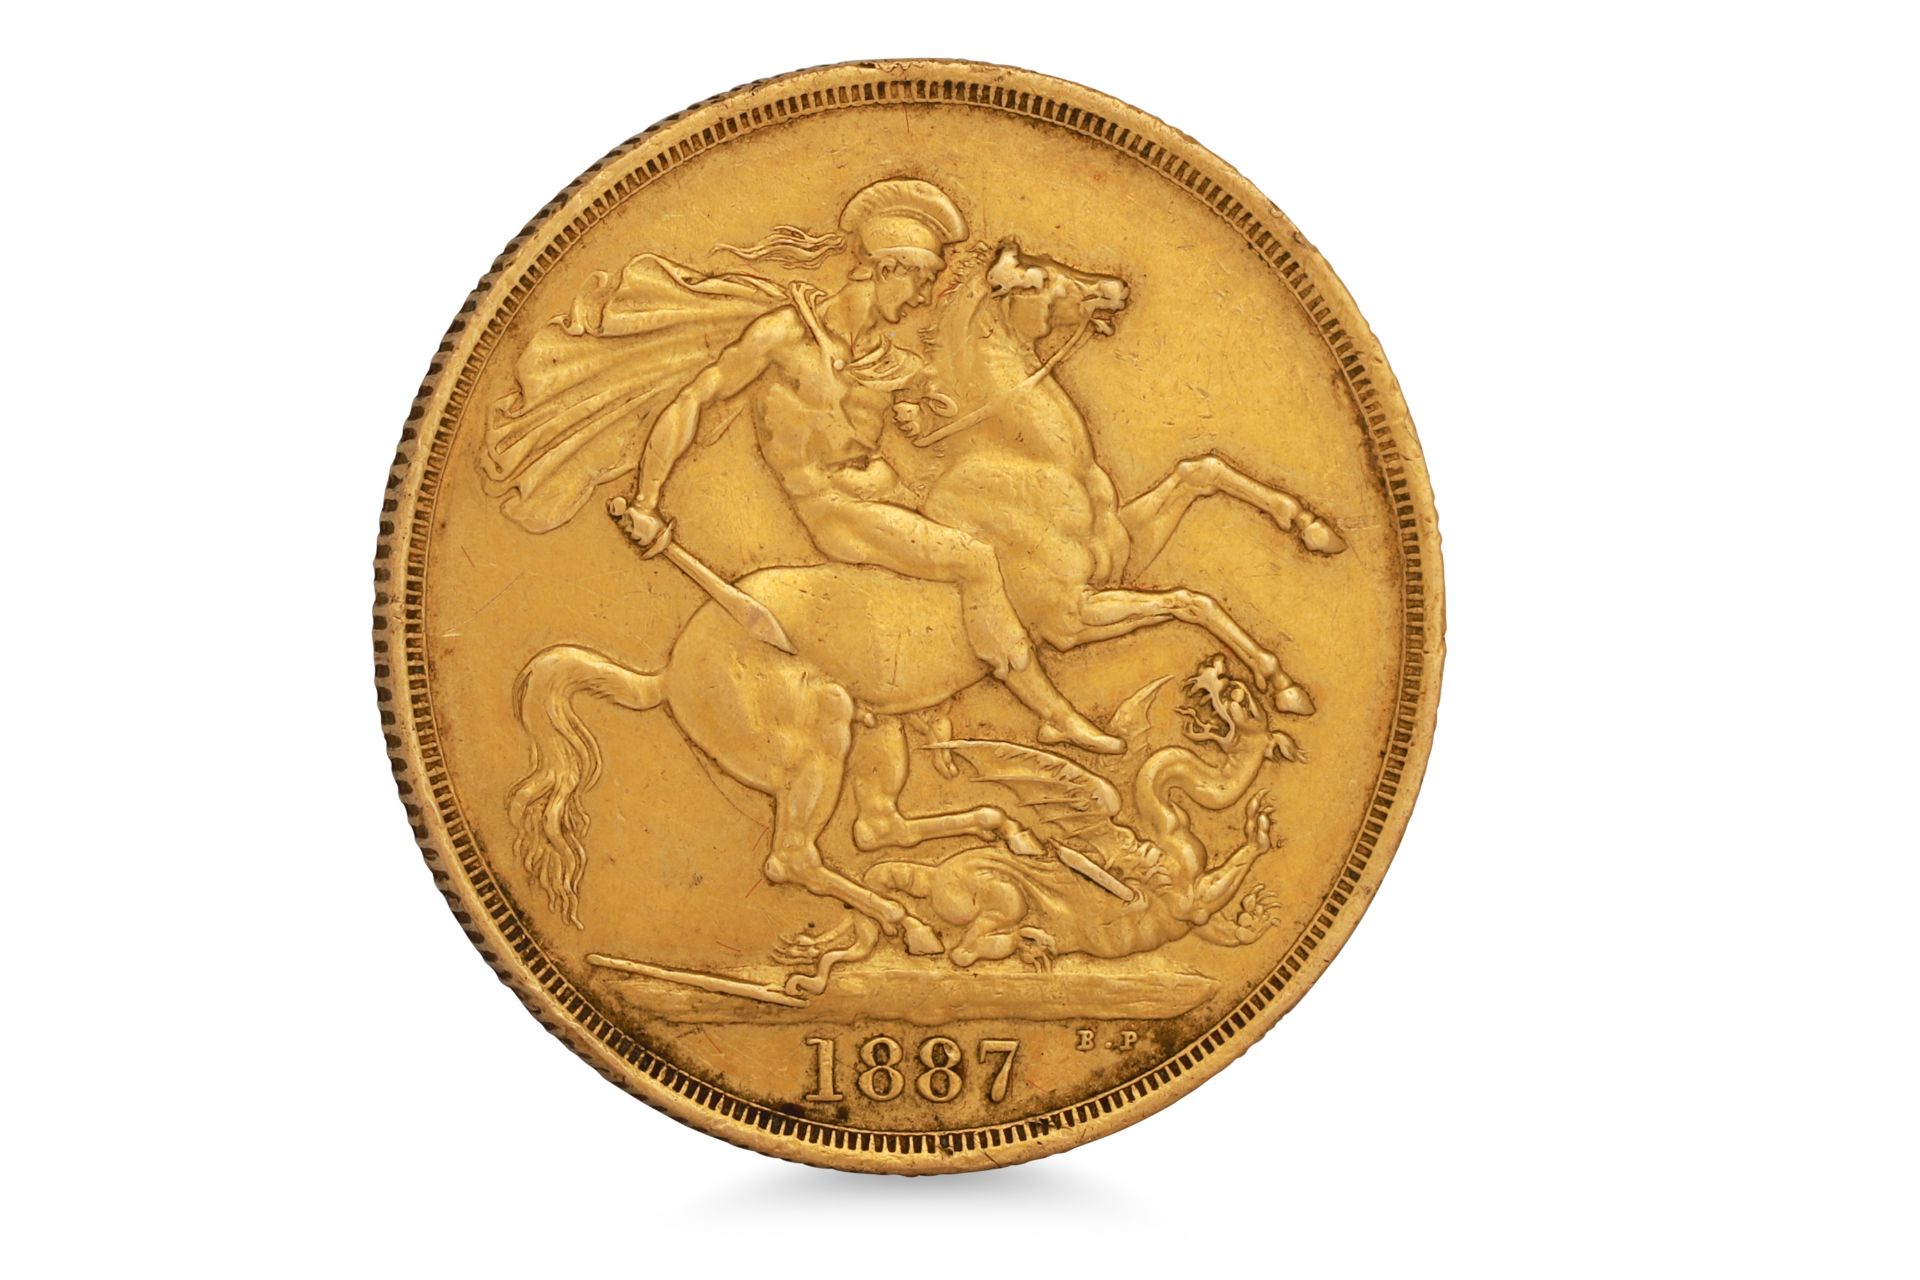 AN 1887 £2 DOUBLE SOVEREIGN ENGLISH GOLD COIN, 22ct, very fine